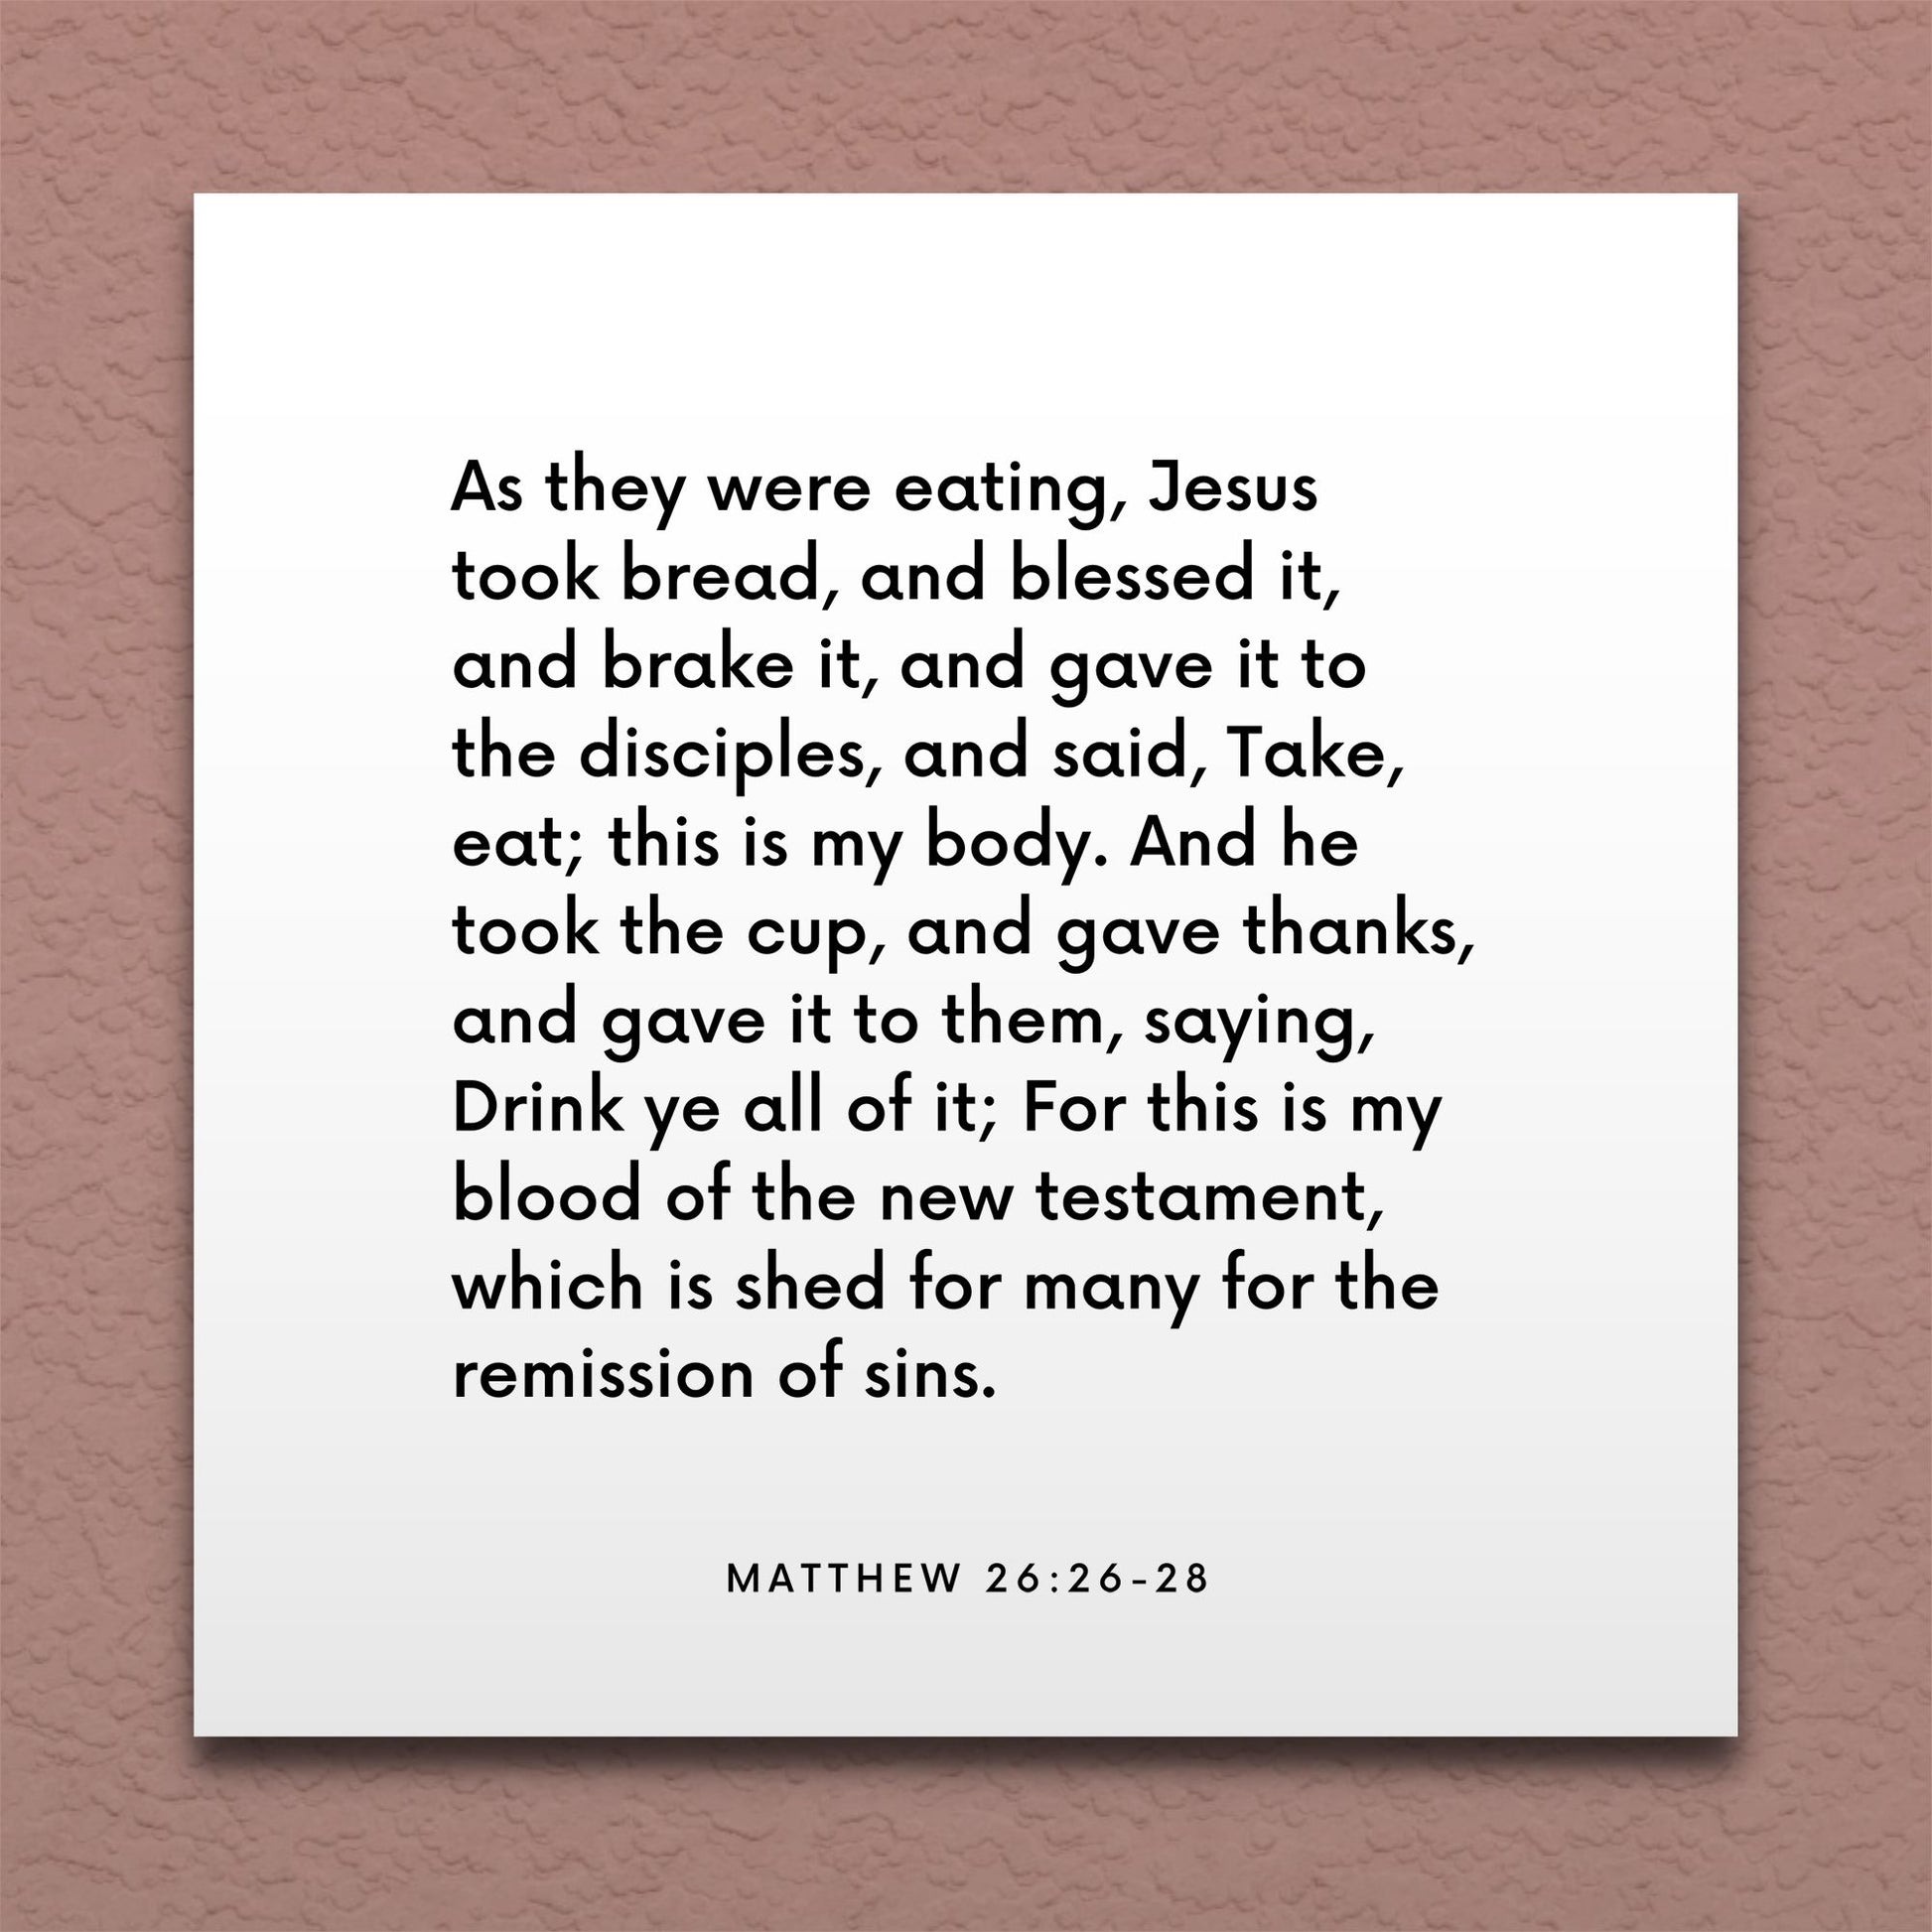 Wall-mounted scripture tile for Matthew 26:26-28 - "Jesus took bread, and blessed it, and brake it"